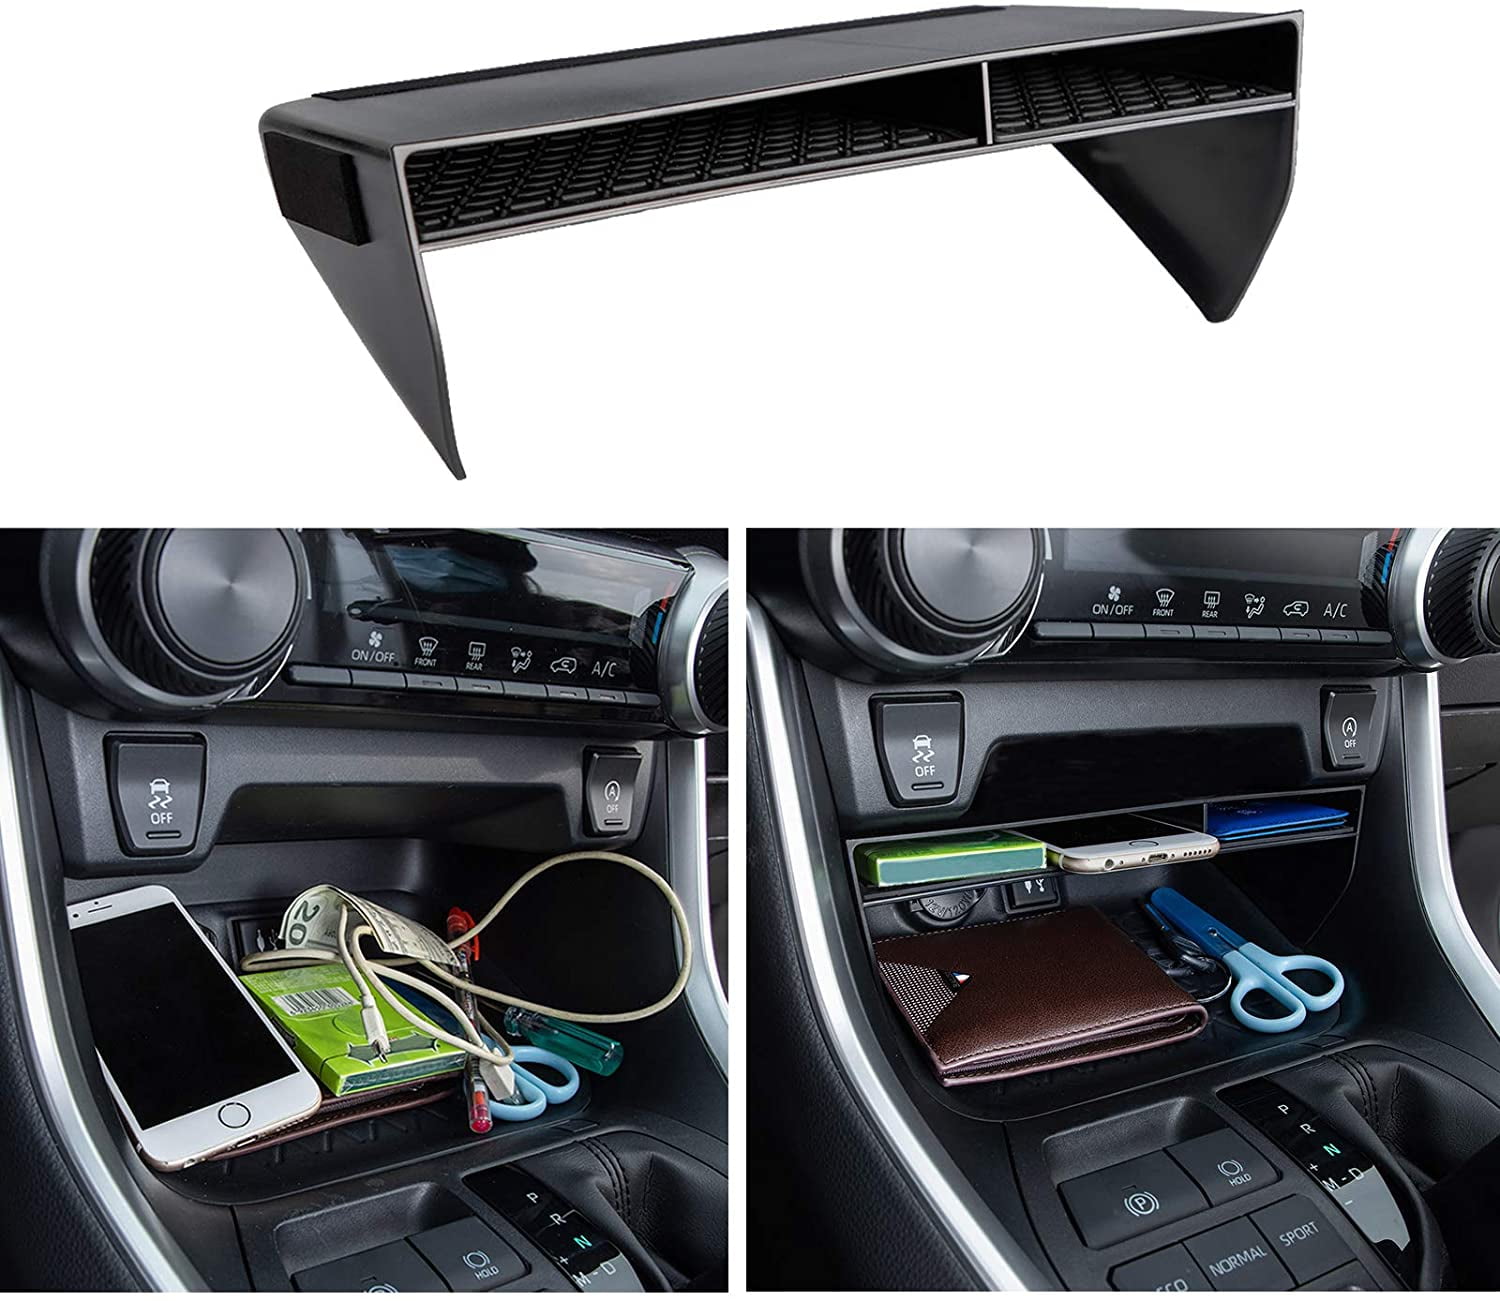 HIGH FLYING for Toyota RAV4 2019 2020 Accessories Center Console Organizer Tray Gear Shift Storage Box Insert Divider Wallets Chewing Gum Double Layers Non-Slip Organizer for Cellphone Cards